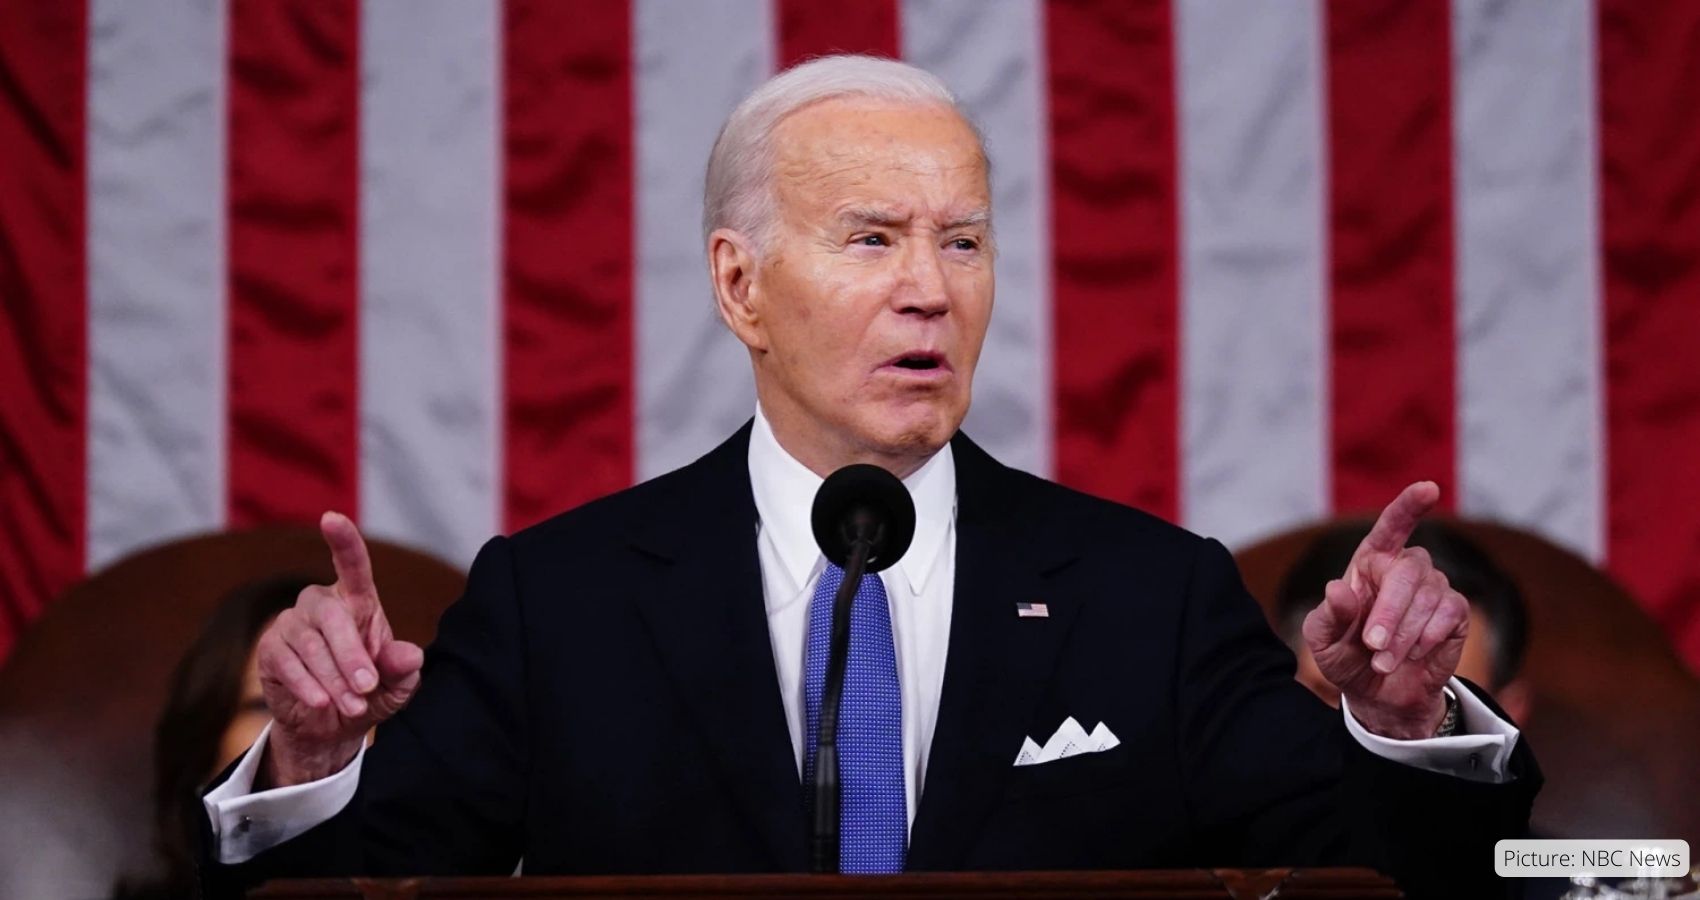 Growing Doubts Over Biden’s Mental Fitness Set Stage for State of the Union Showdown